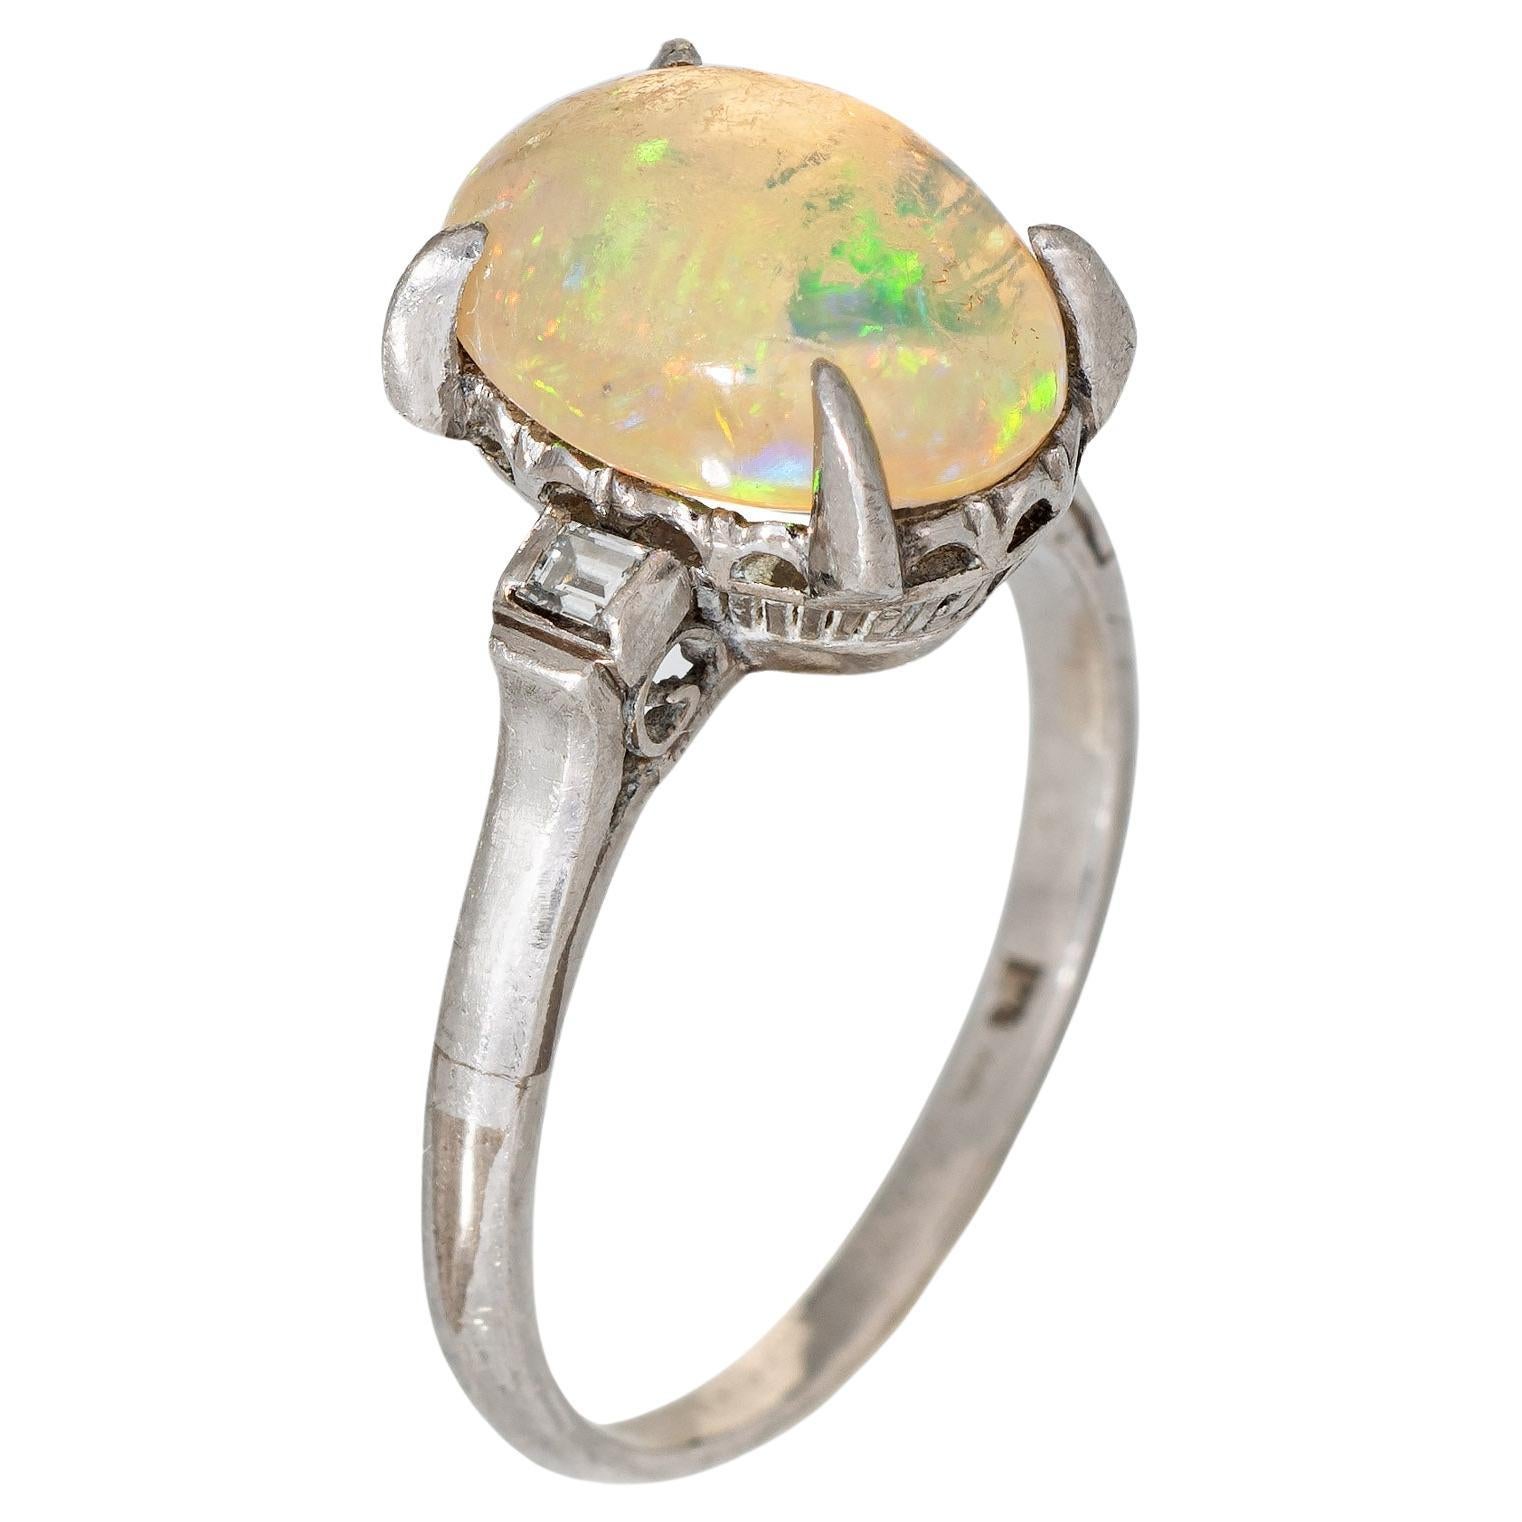 2.75ct Natural Jelly Opal Diamond Ring Platinum Estate Fine Jewelry Sz 6 For Sale